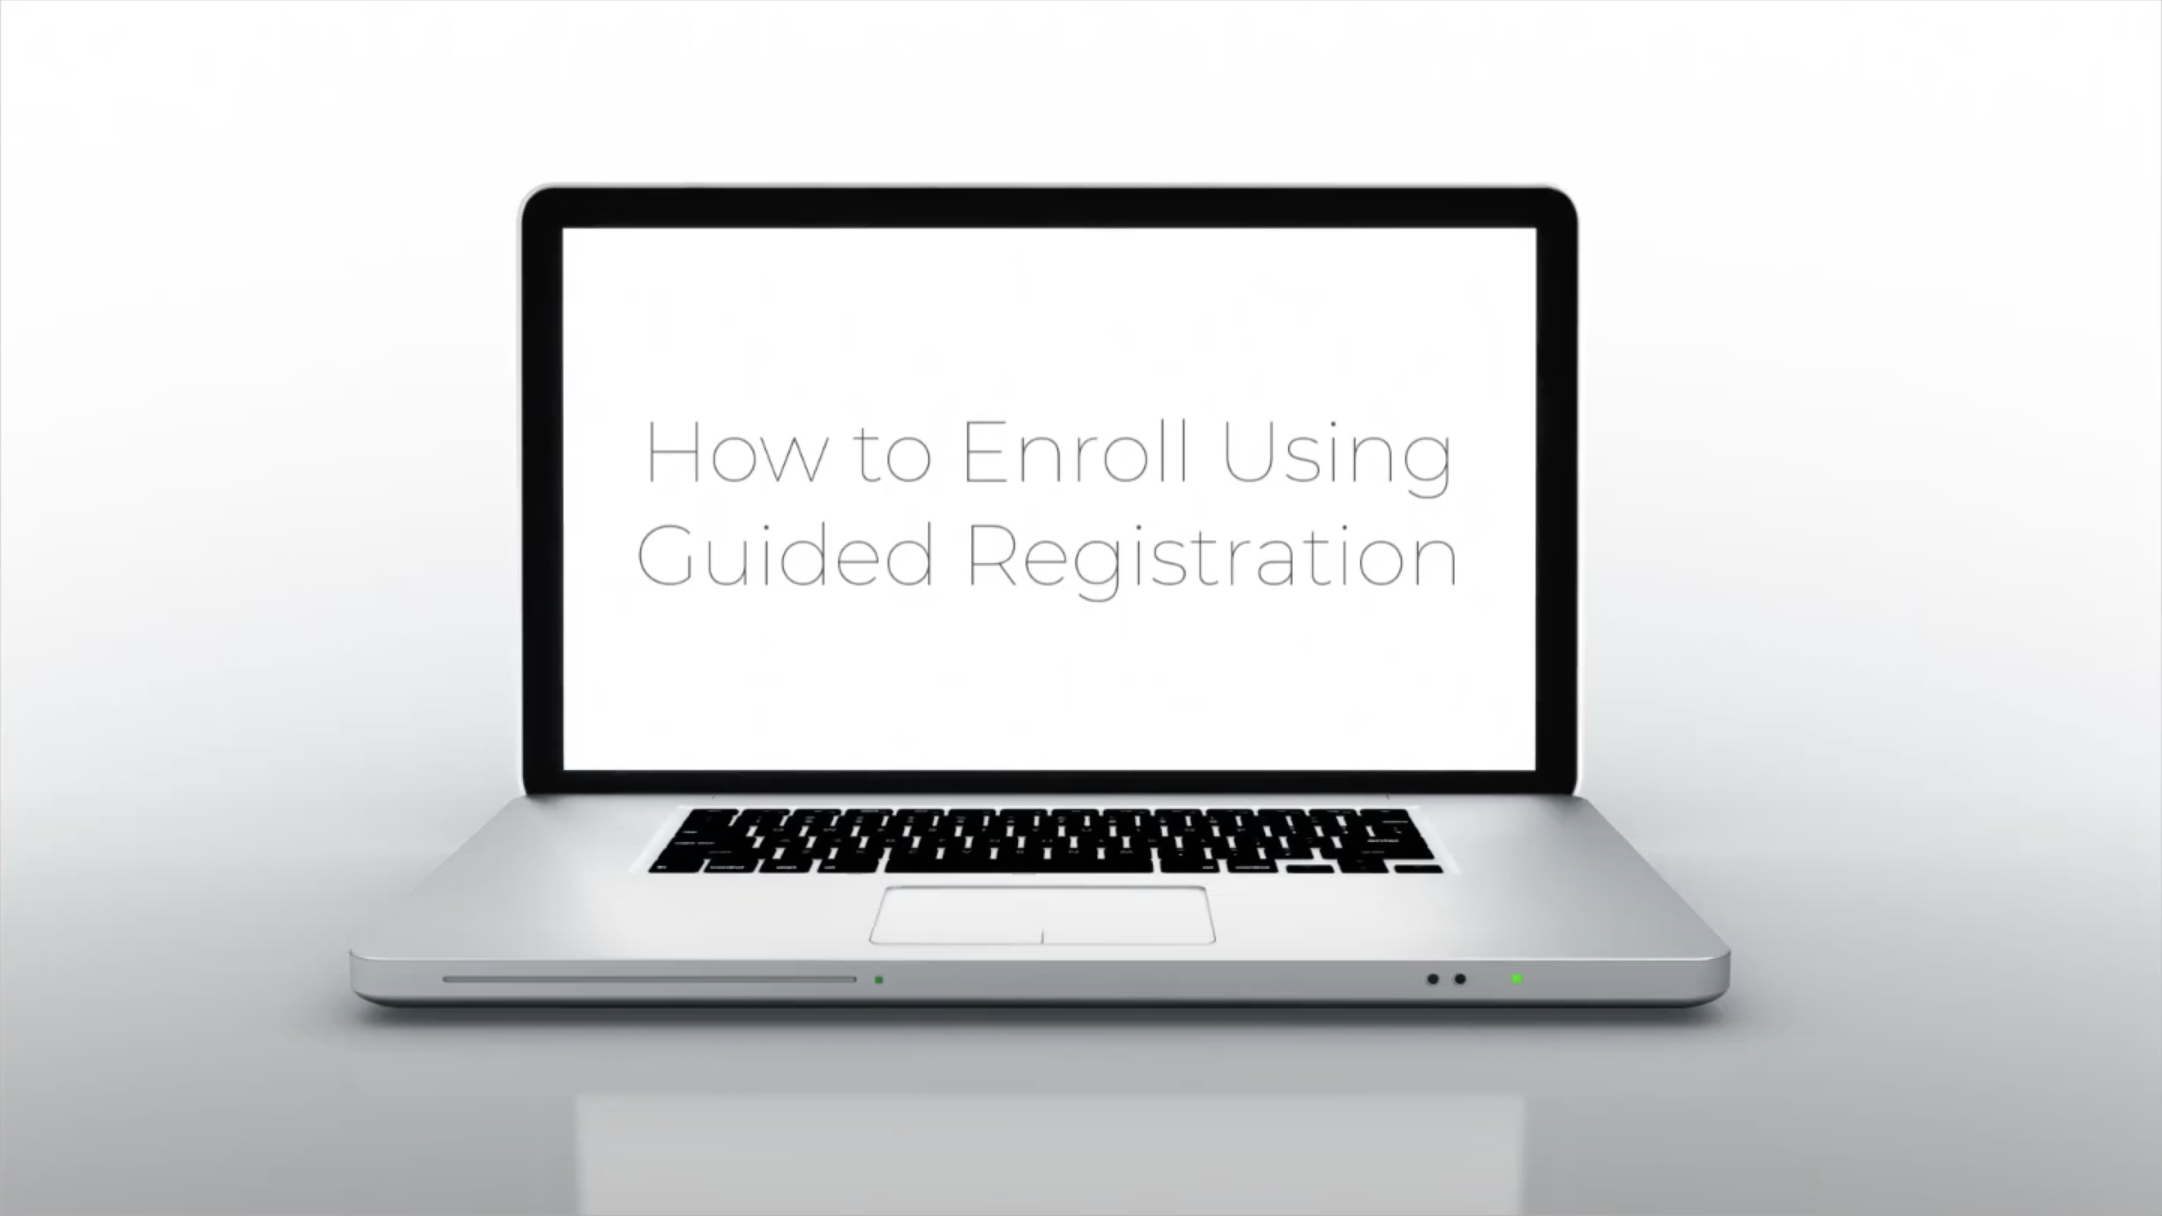 How to Enroll using Guided Registration